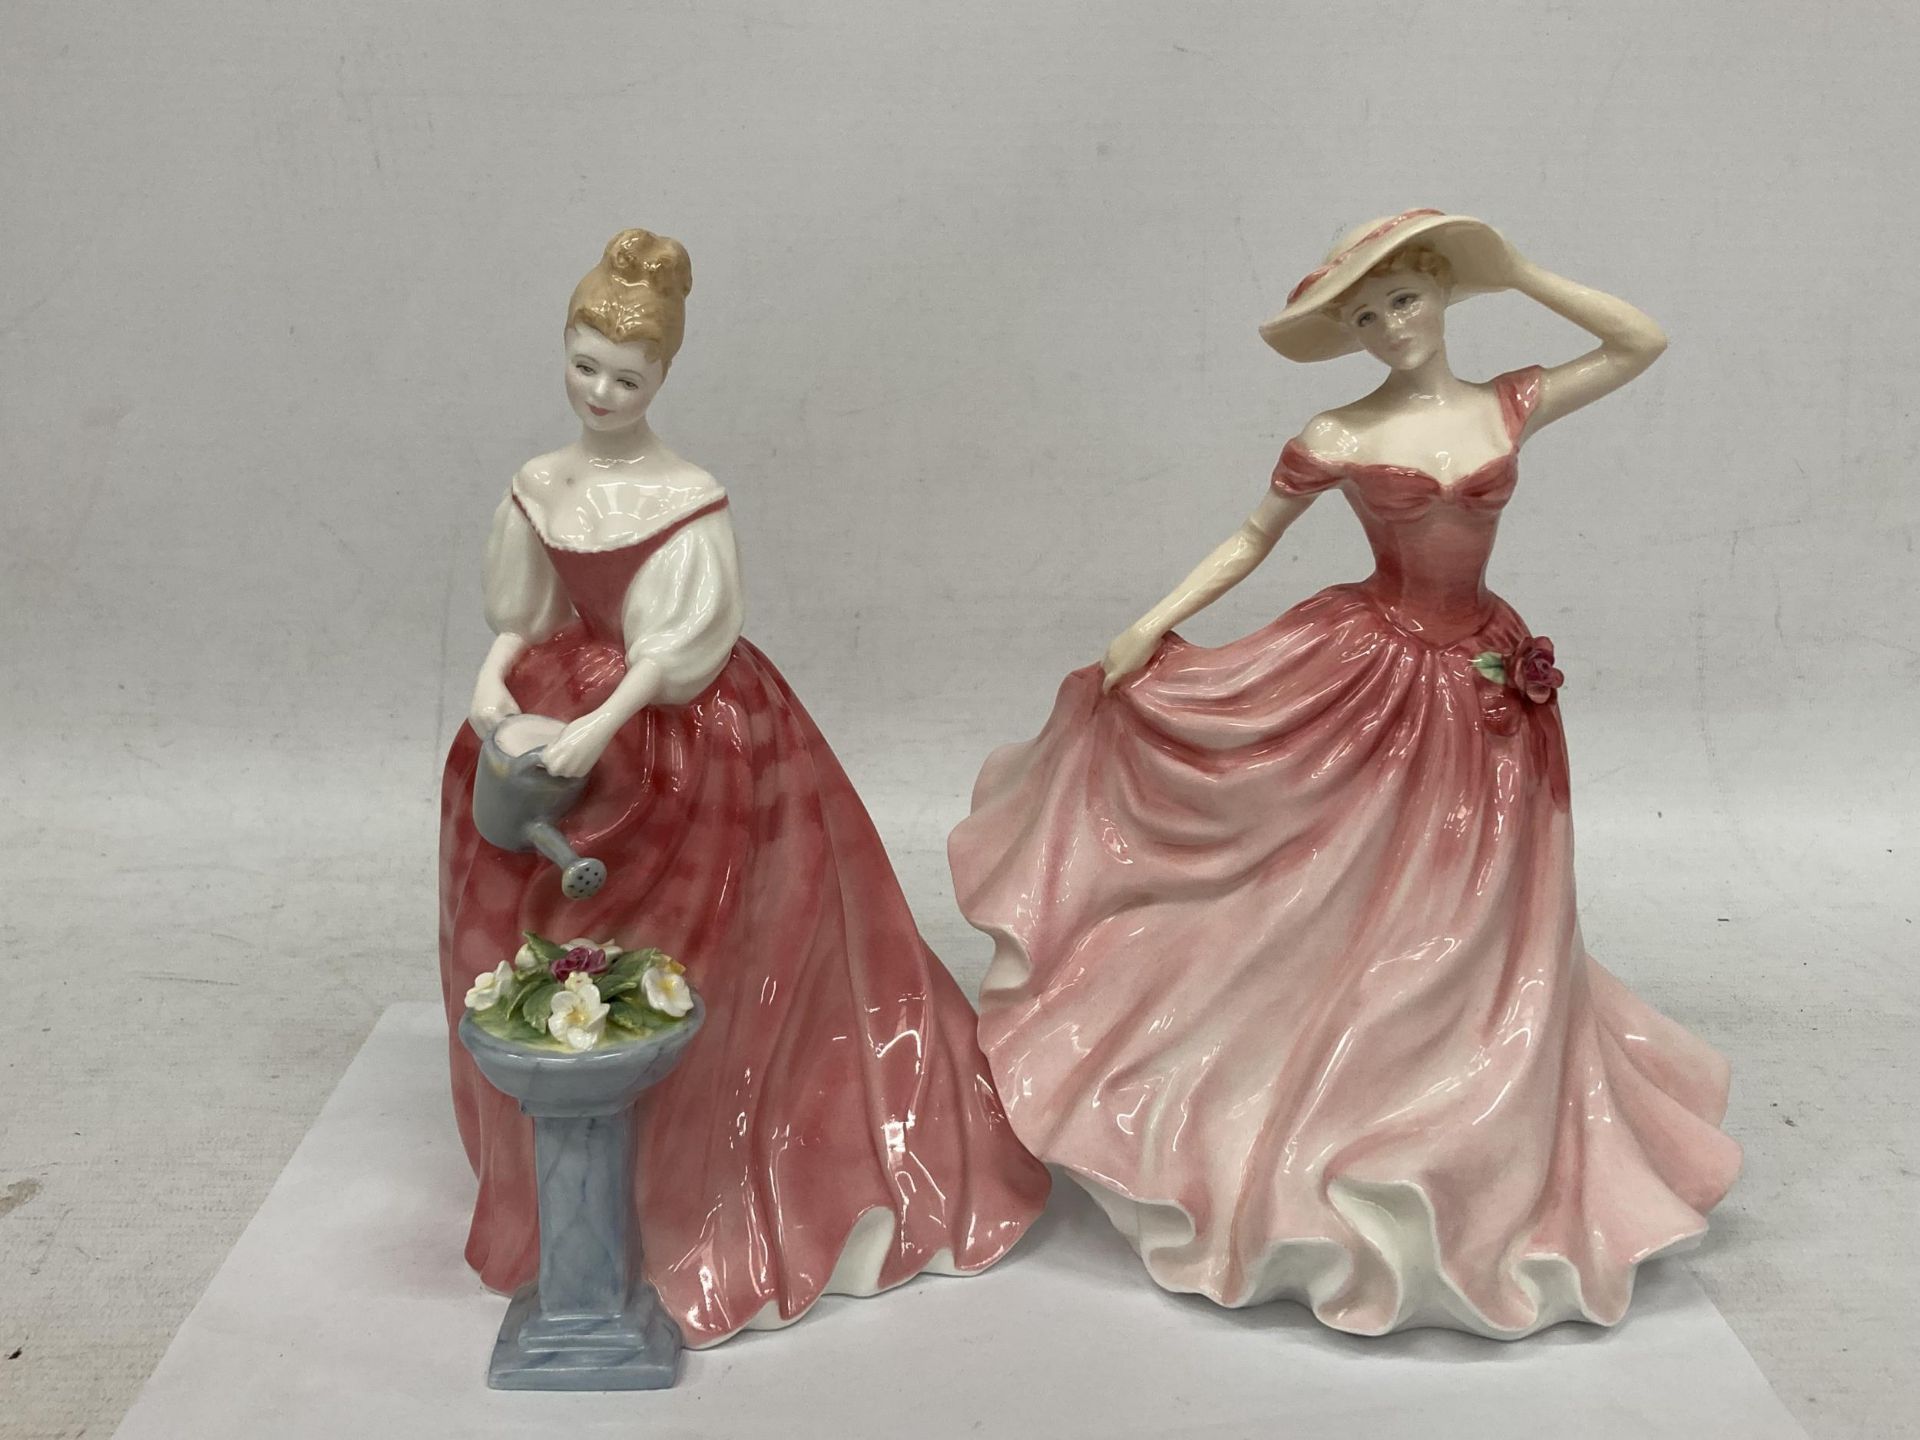 TWO ROYAL DOULTON FIGURINES "ALEXANDRA" HN 3292 AND LADY OF THE YEAR 1997 HN 3992 "ELLEN"